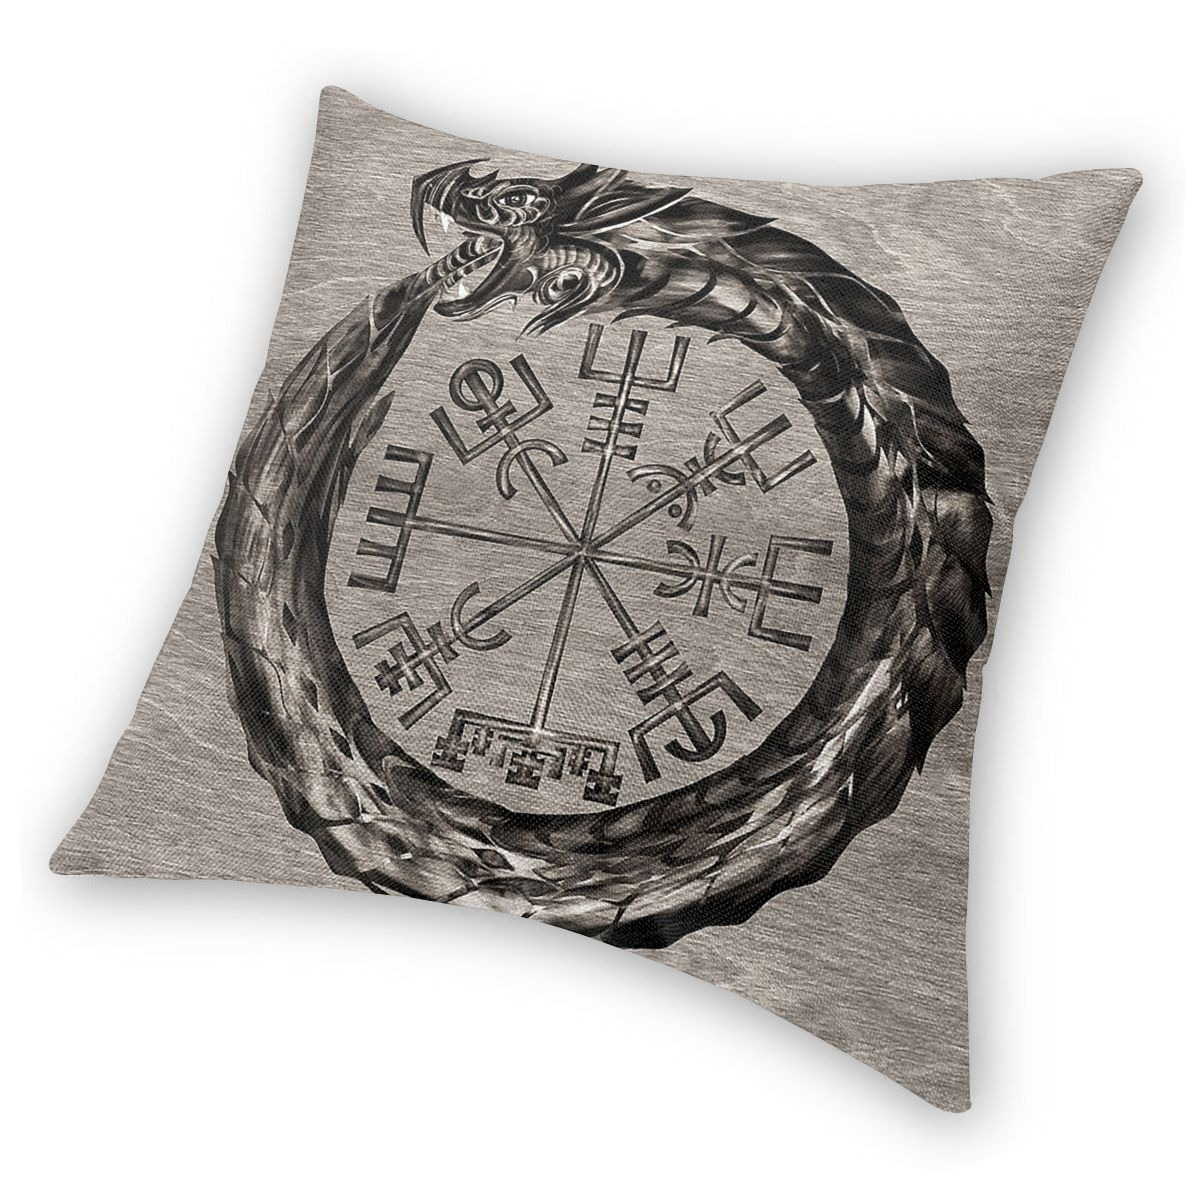 Pillow Cover Home Decor With Vegvisir Viking / Cushion Cover Throw Pillow Double-sided Printing - HARD'N'HEAVY